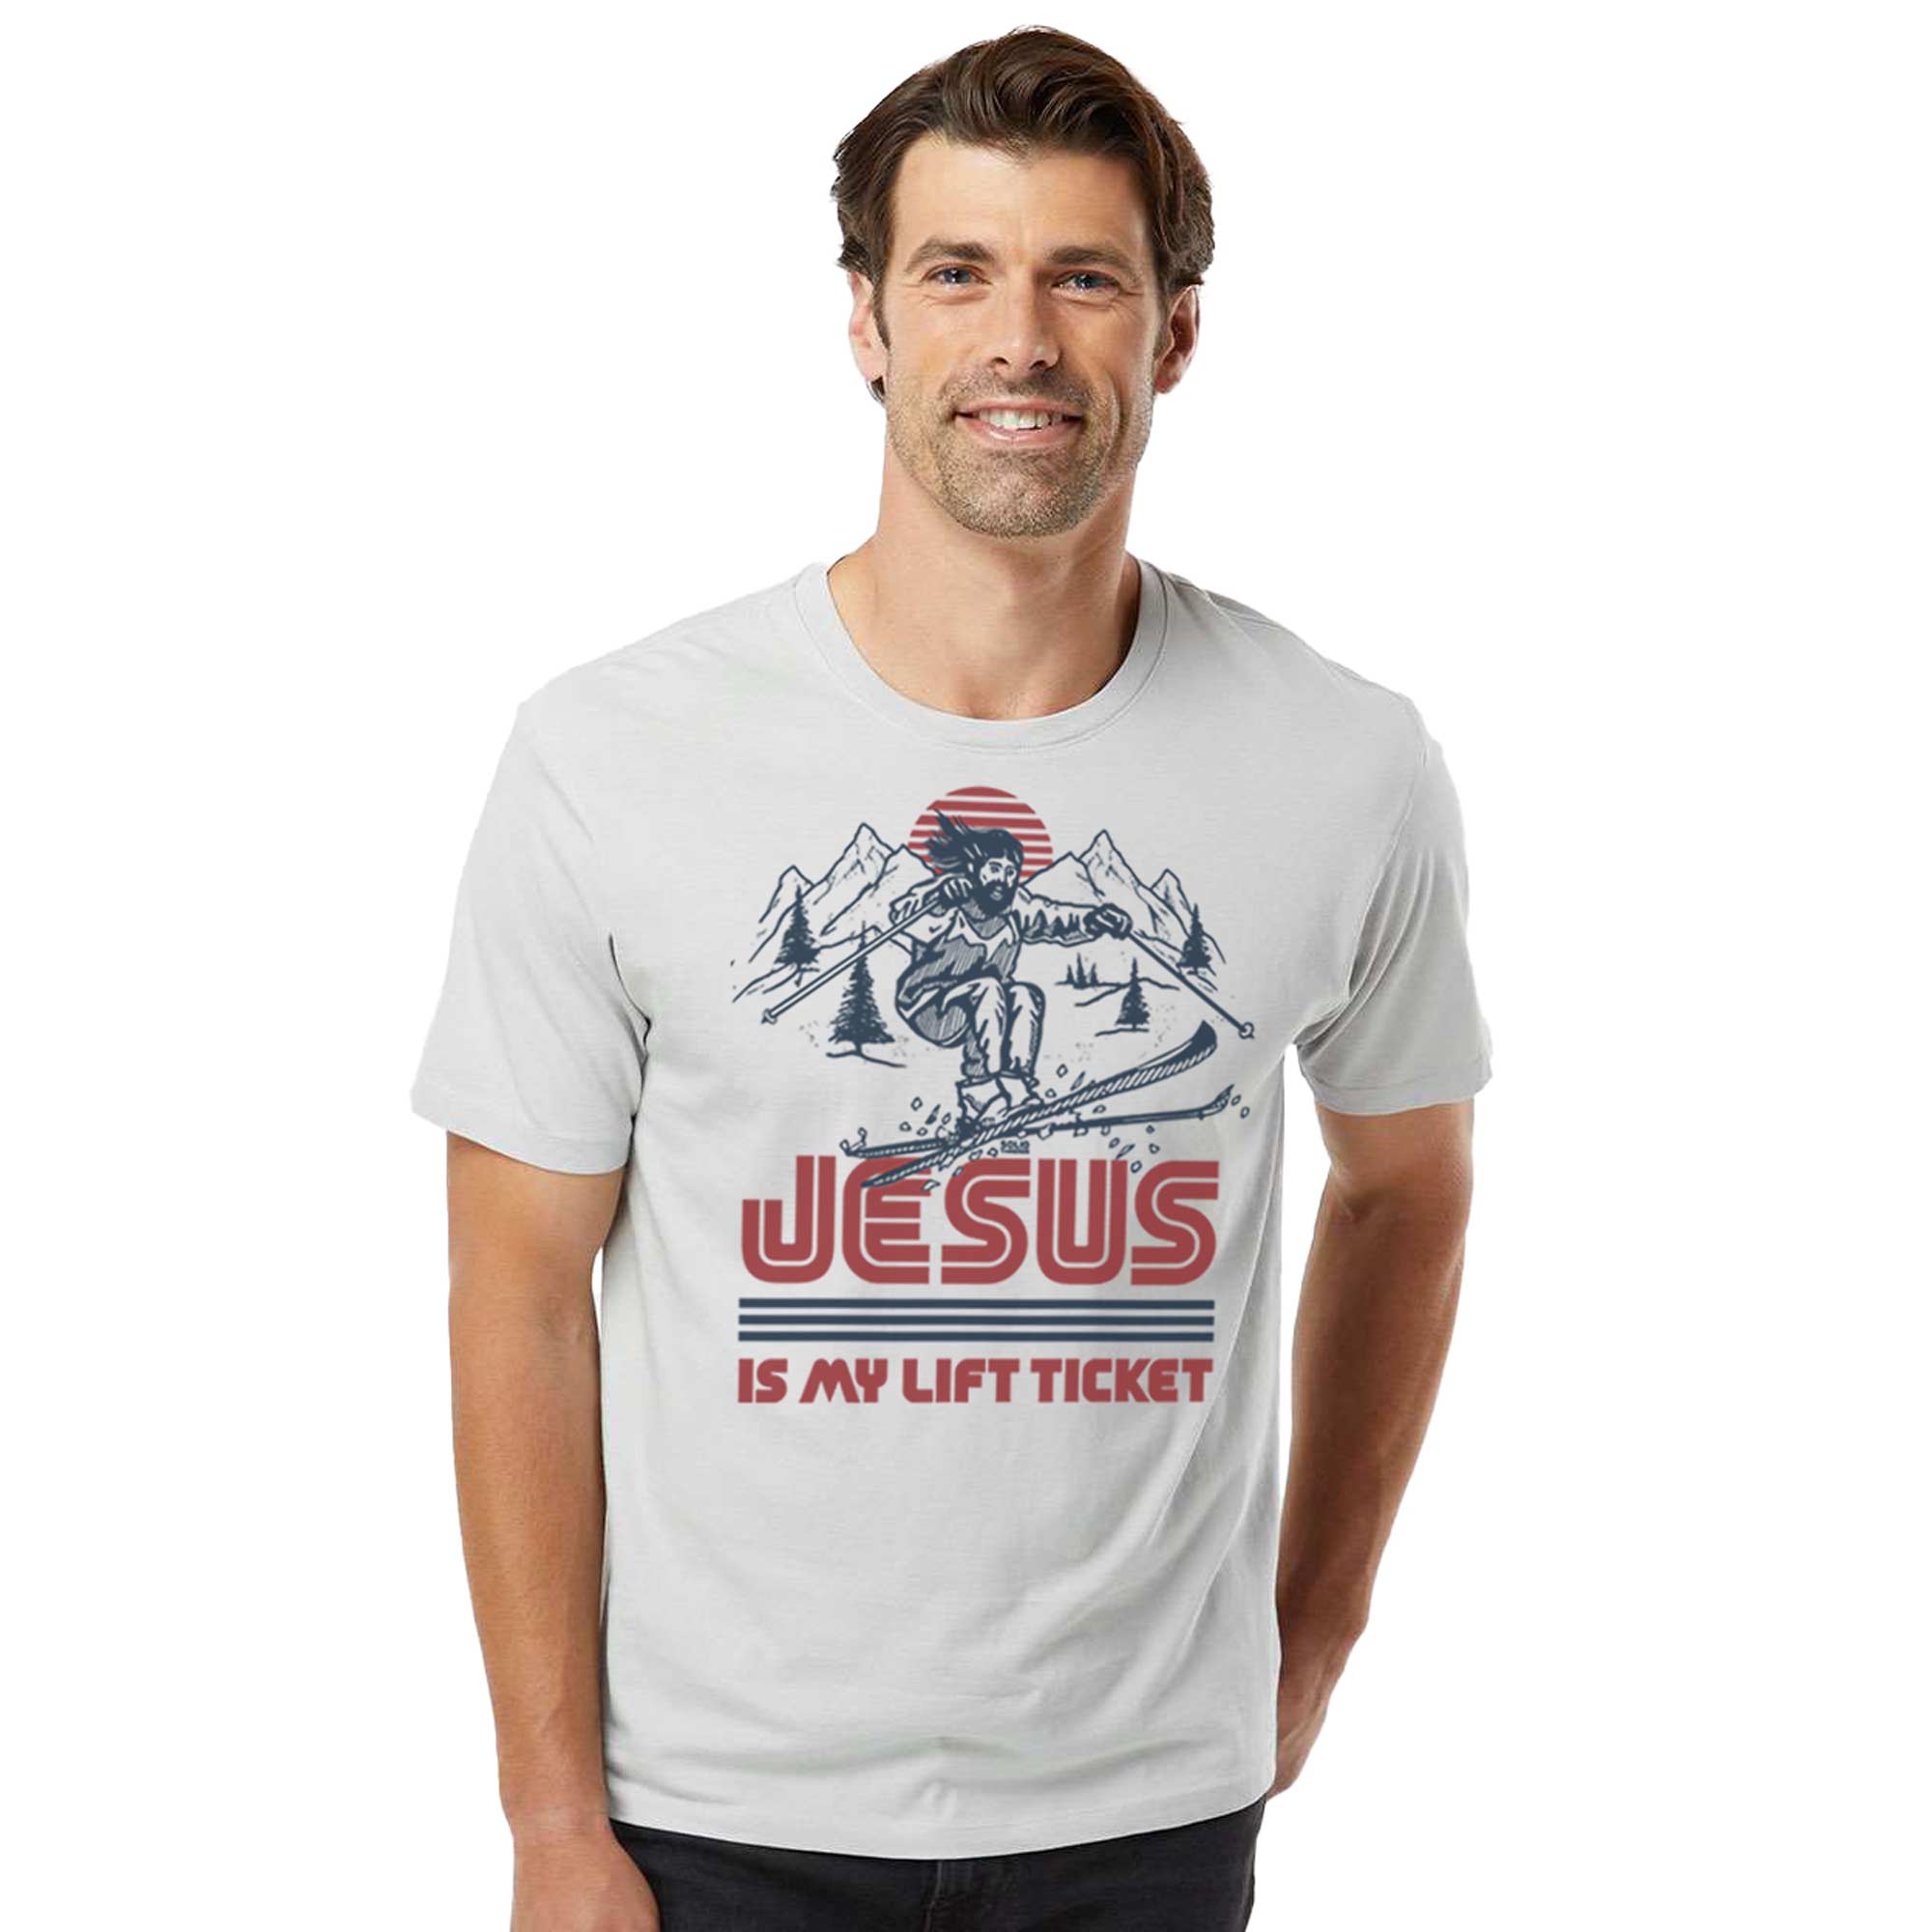 Jesus Is My Lift Ticket Funny Organic Cotton T-shirt | Cool Skiing   Tee On Model | Solid Threads